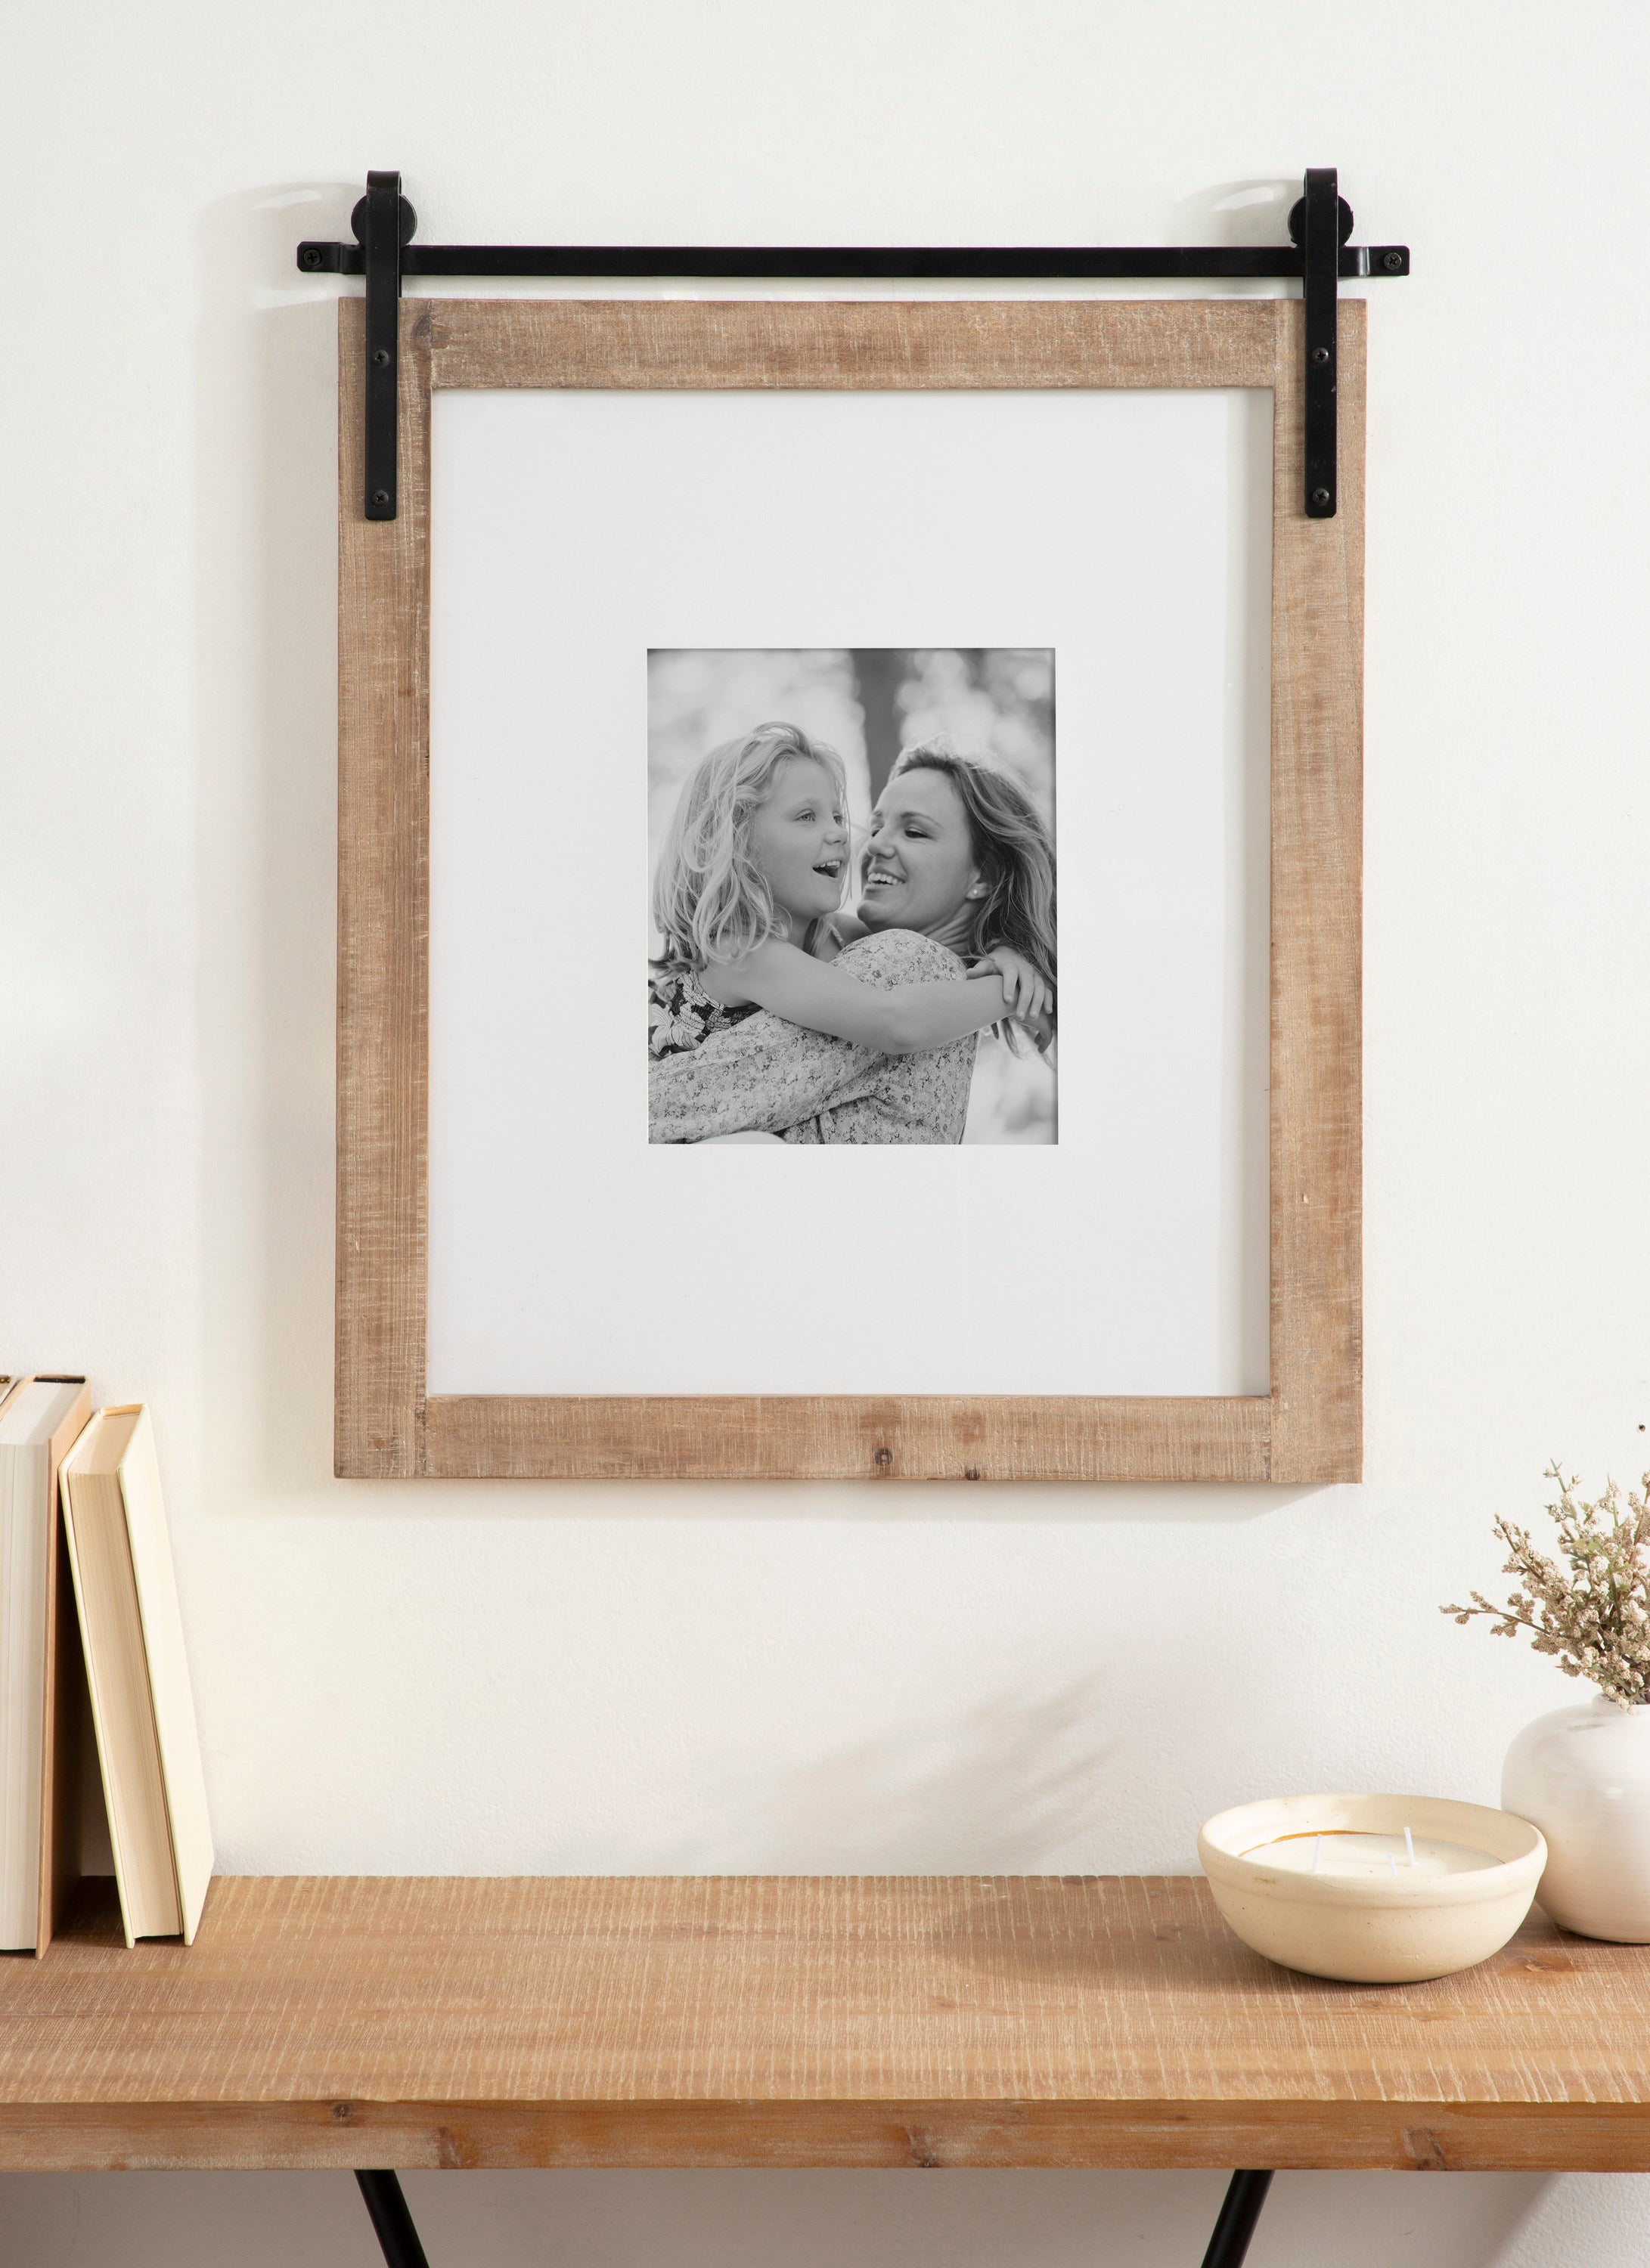 Cates Wood Picture Frame